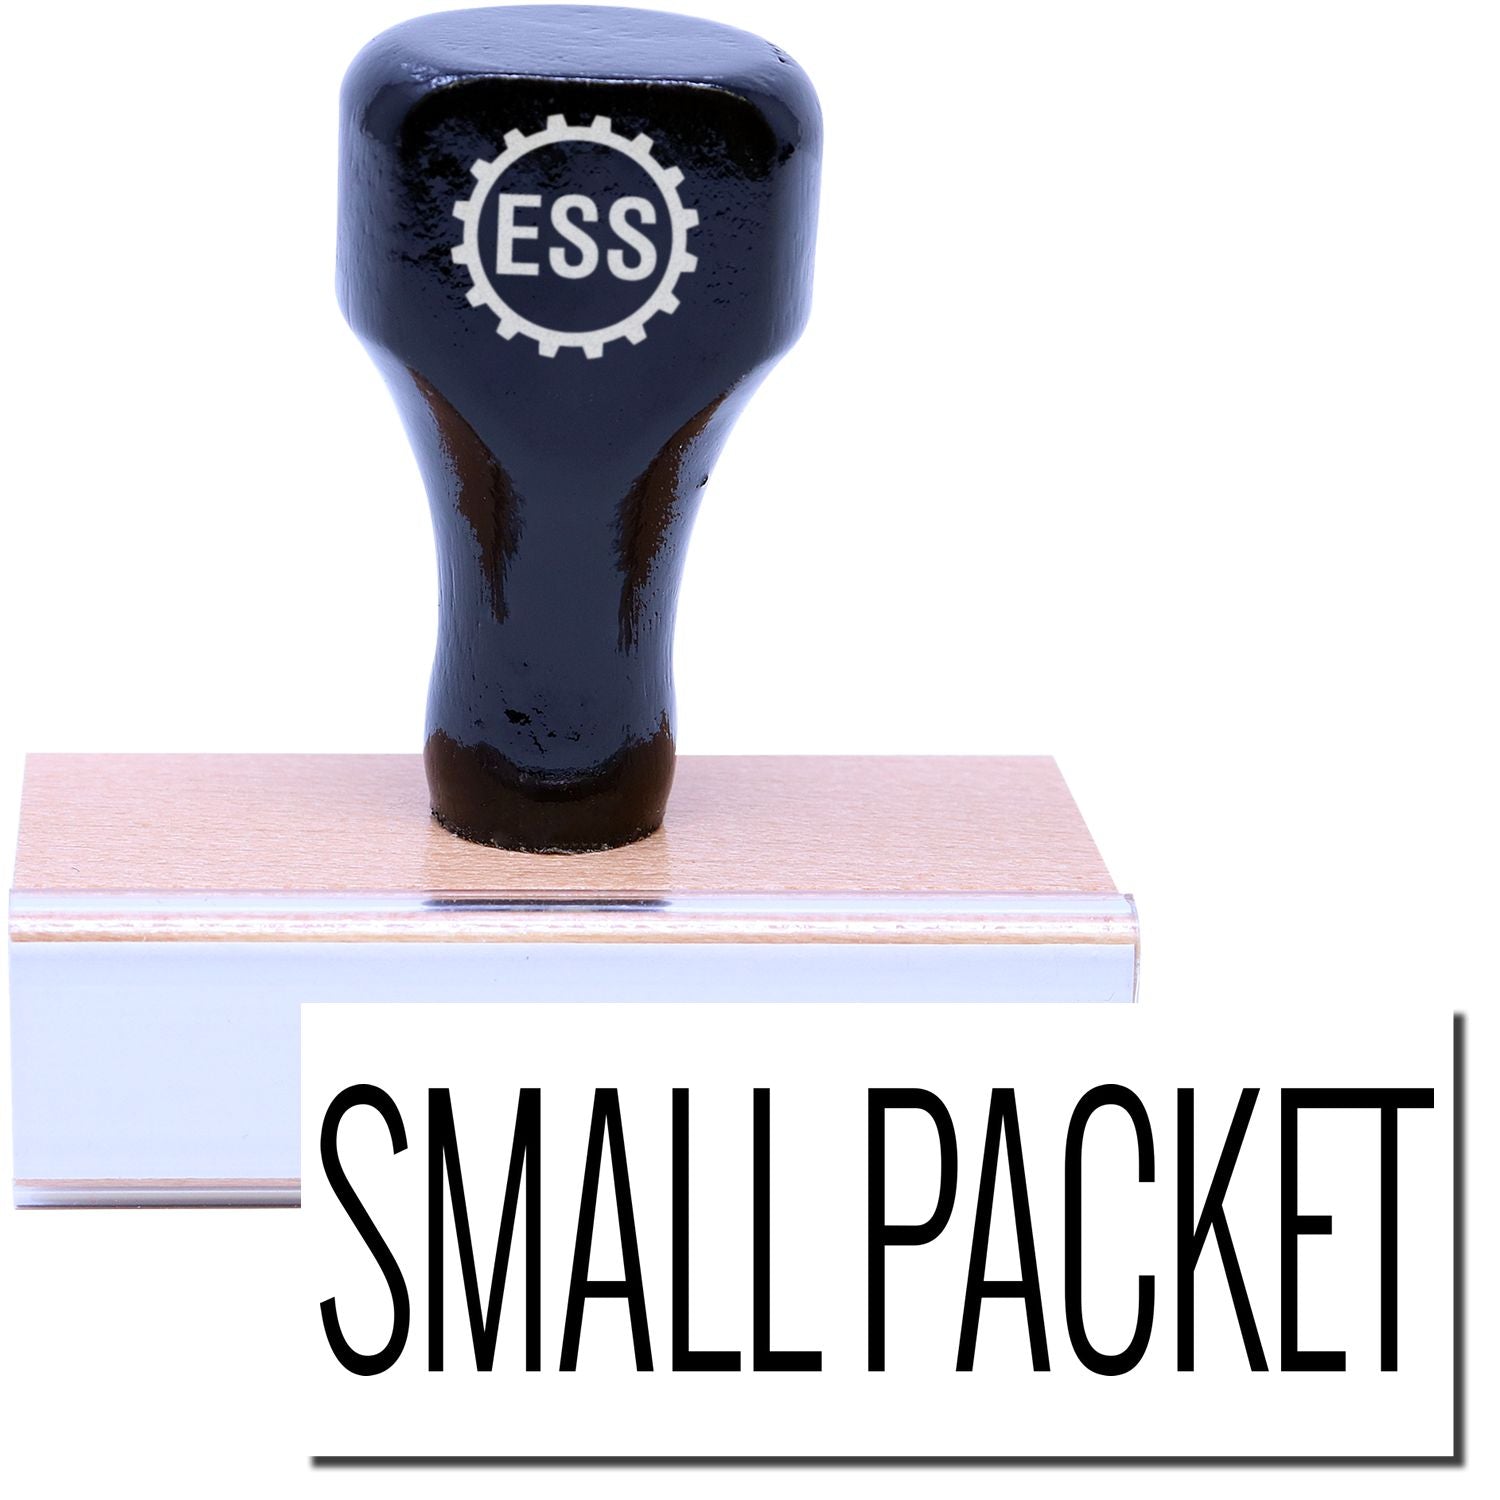 A stock office rubber stamp with a stamped image showing how the text "SMALL PACKET" in a large font is displayed after stamping.